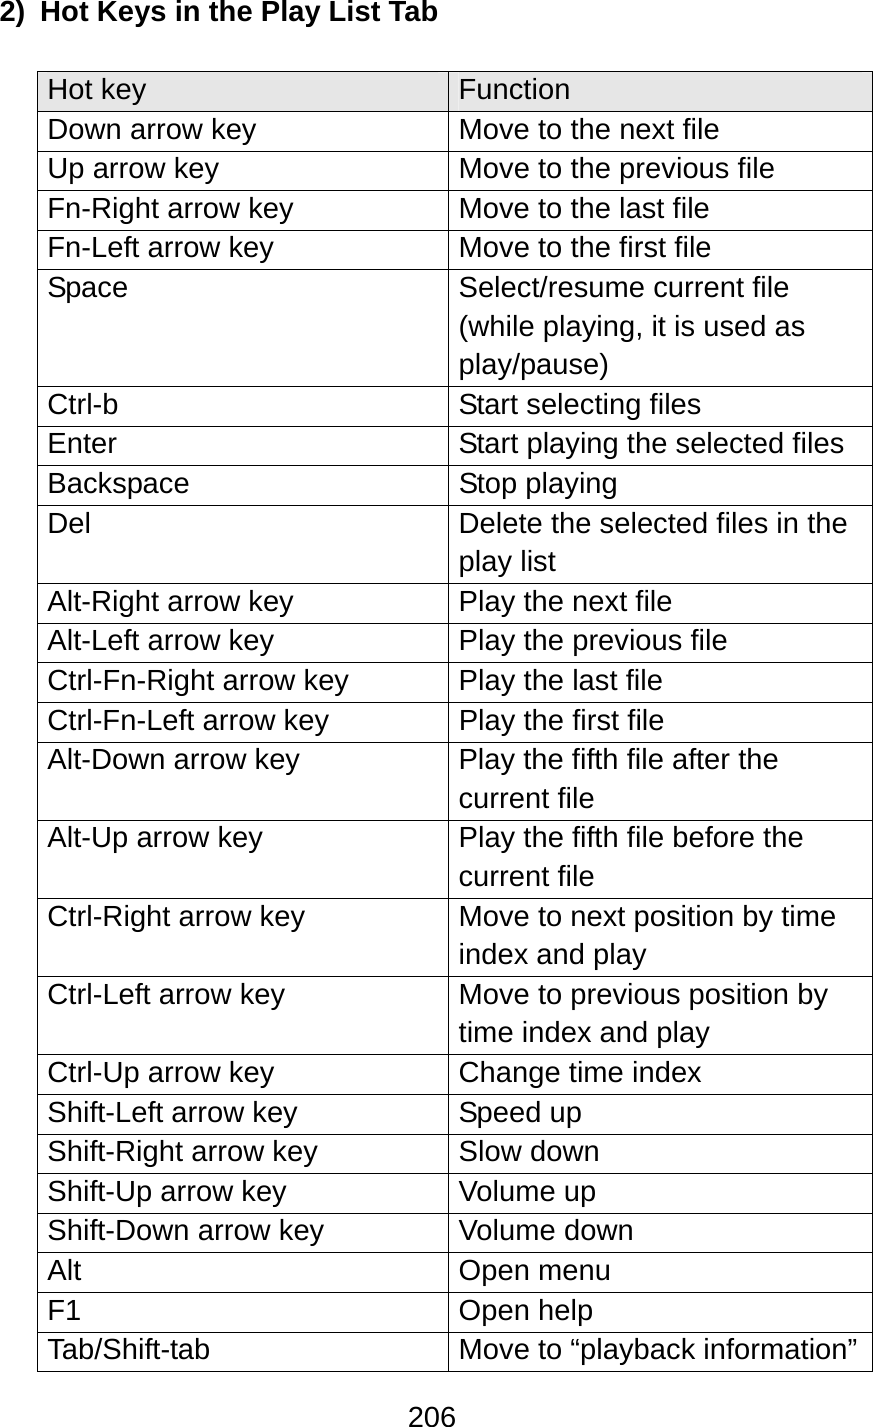 206  2)  Hot Keys in the Play List Tab  Hot key  Function Down arrow key  Move to the next file Up arrow key  Move to the previous file Fn-Right arrow key  Move to the last file Fn-Left arrow key  Move to the first file Space  Select/resume current file (while playing, it is used as play/pause) Ctrl-b  Start selecting files Enter  Start playing the selected files Backspace Stop playing Del  Delete the selected files in the play list Alt-Right arrow key  Play the next file Alt-Left arrow key  Play the previous file Ctrl-Fn-Right arrow key  Play the last file Ctrl-Fn-Left arrow key  Play the first file Alt-Down arrow key  Play the fifth file after the current file Alt-Up arrow key  Play the fifth file before the current file Ctrl-Right arrow key  Move to next position by time index and play Ctrl-Left arrow key  Move to previous position by time index and play Ctrl-Up arrow key  Change time index Shift-Left arrow key  Speed up Shift-Right arrow key  Slow down Shift-Up arrow key  Volume up Shift-Down arrow key  Volume down Alt Open menu F1 Open help Tab/Shift-tab  Move to “playback information” 